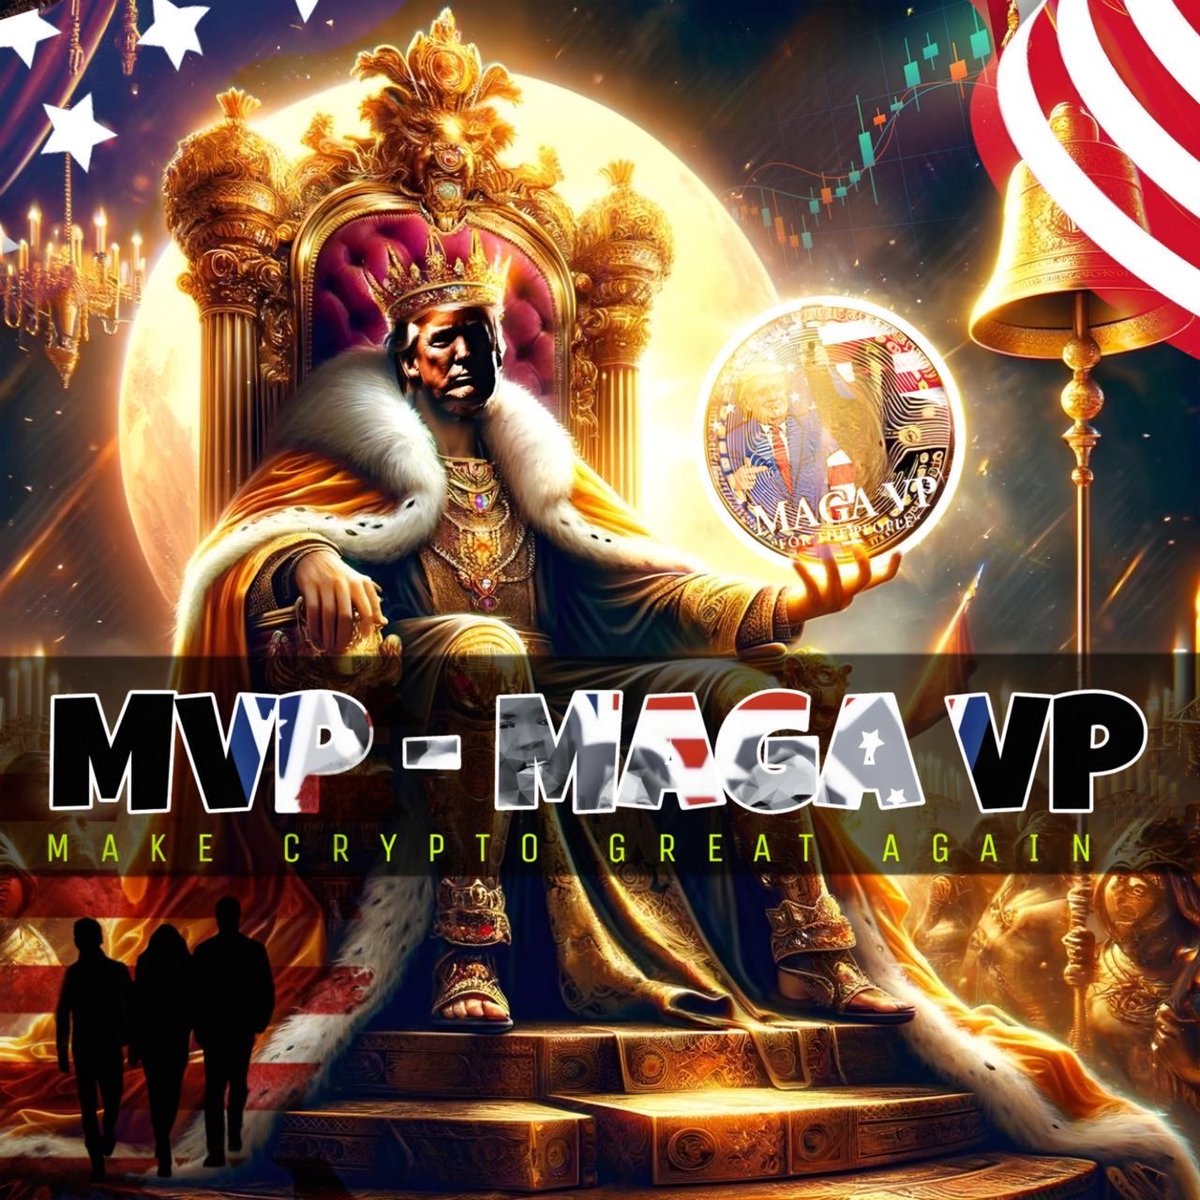 PolitiFi is leading altseason. The focus this season? Political finance. One token has skyrocketed 125% already post-Trump's GALA talk, MAGA VP $MVP Fueled by $TRUMP whales and extensive marketing, keep your eyes on this one! 4 chains, 1% buy/sell tax allocation to reward $MVP…